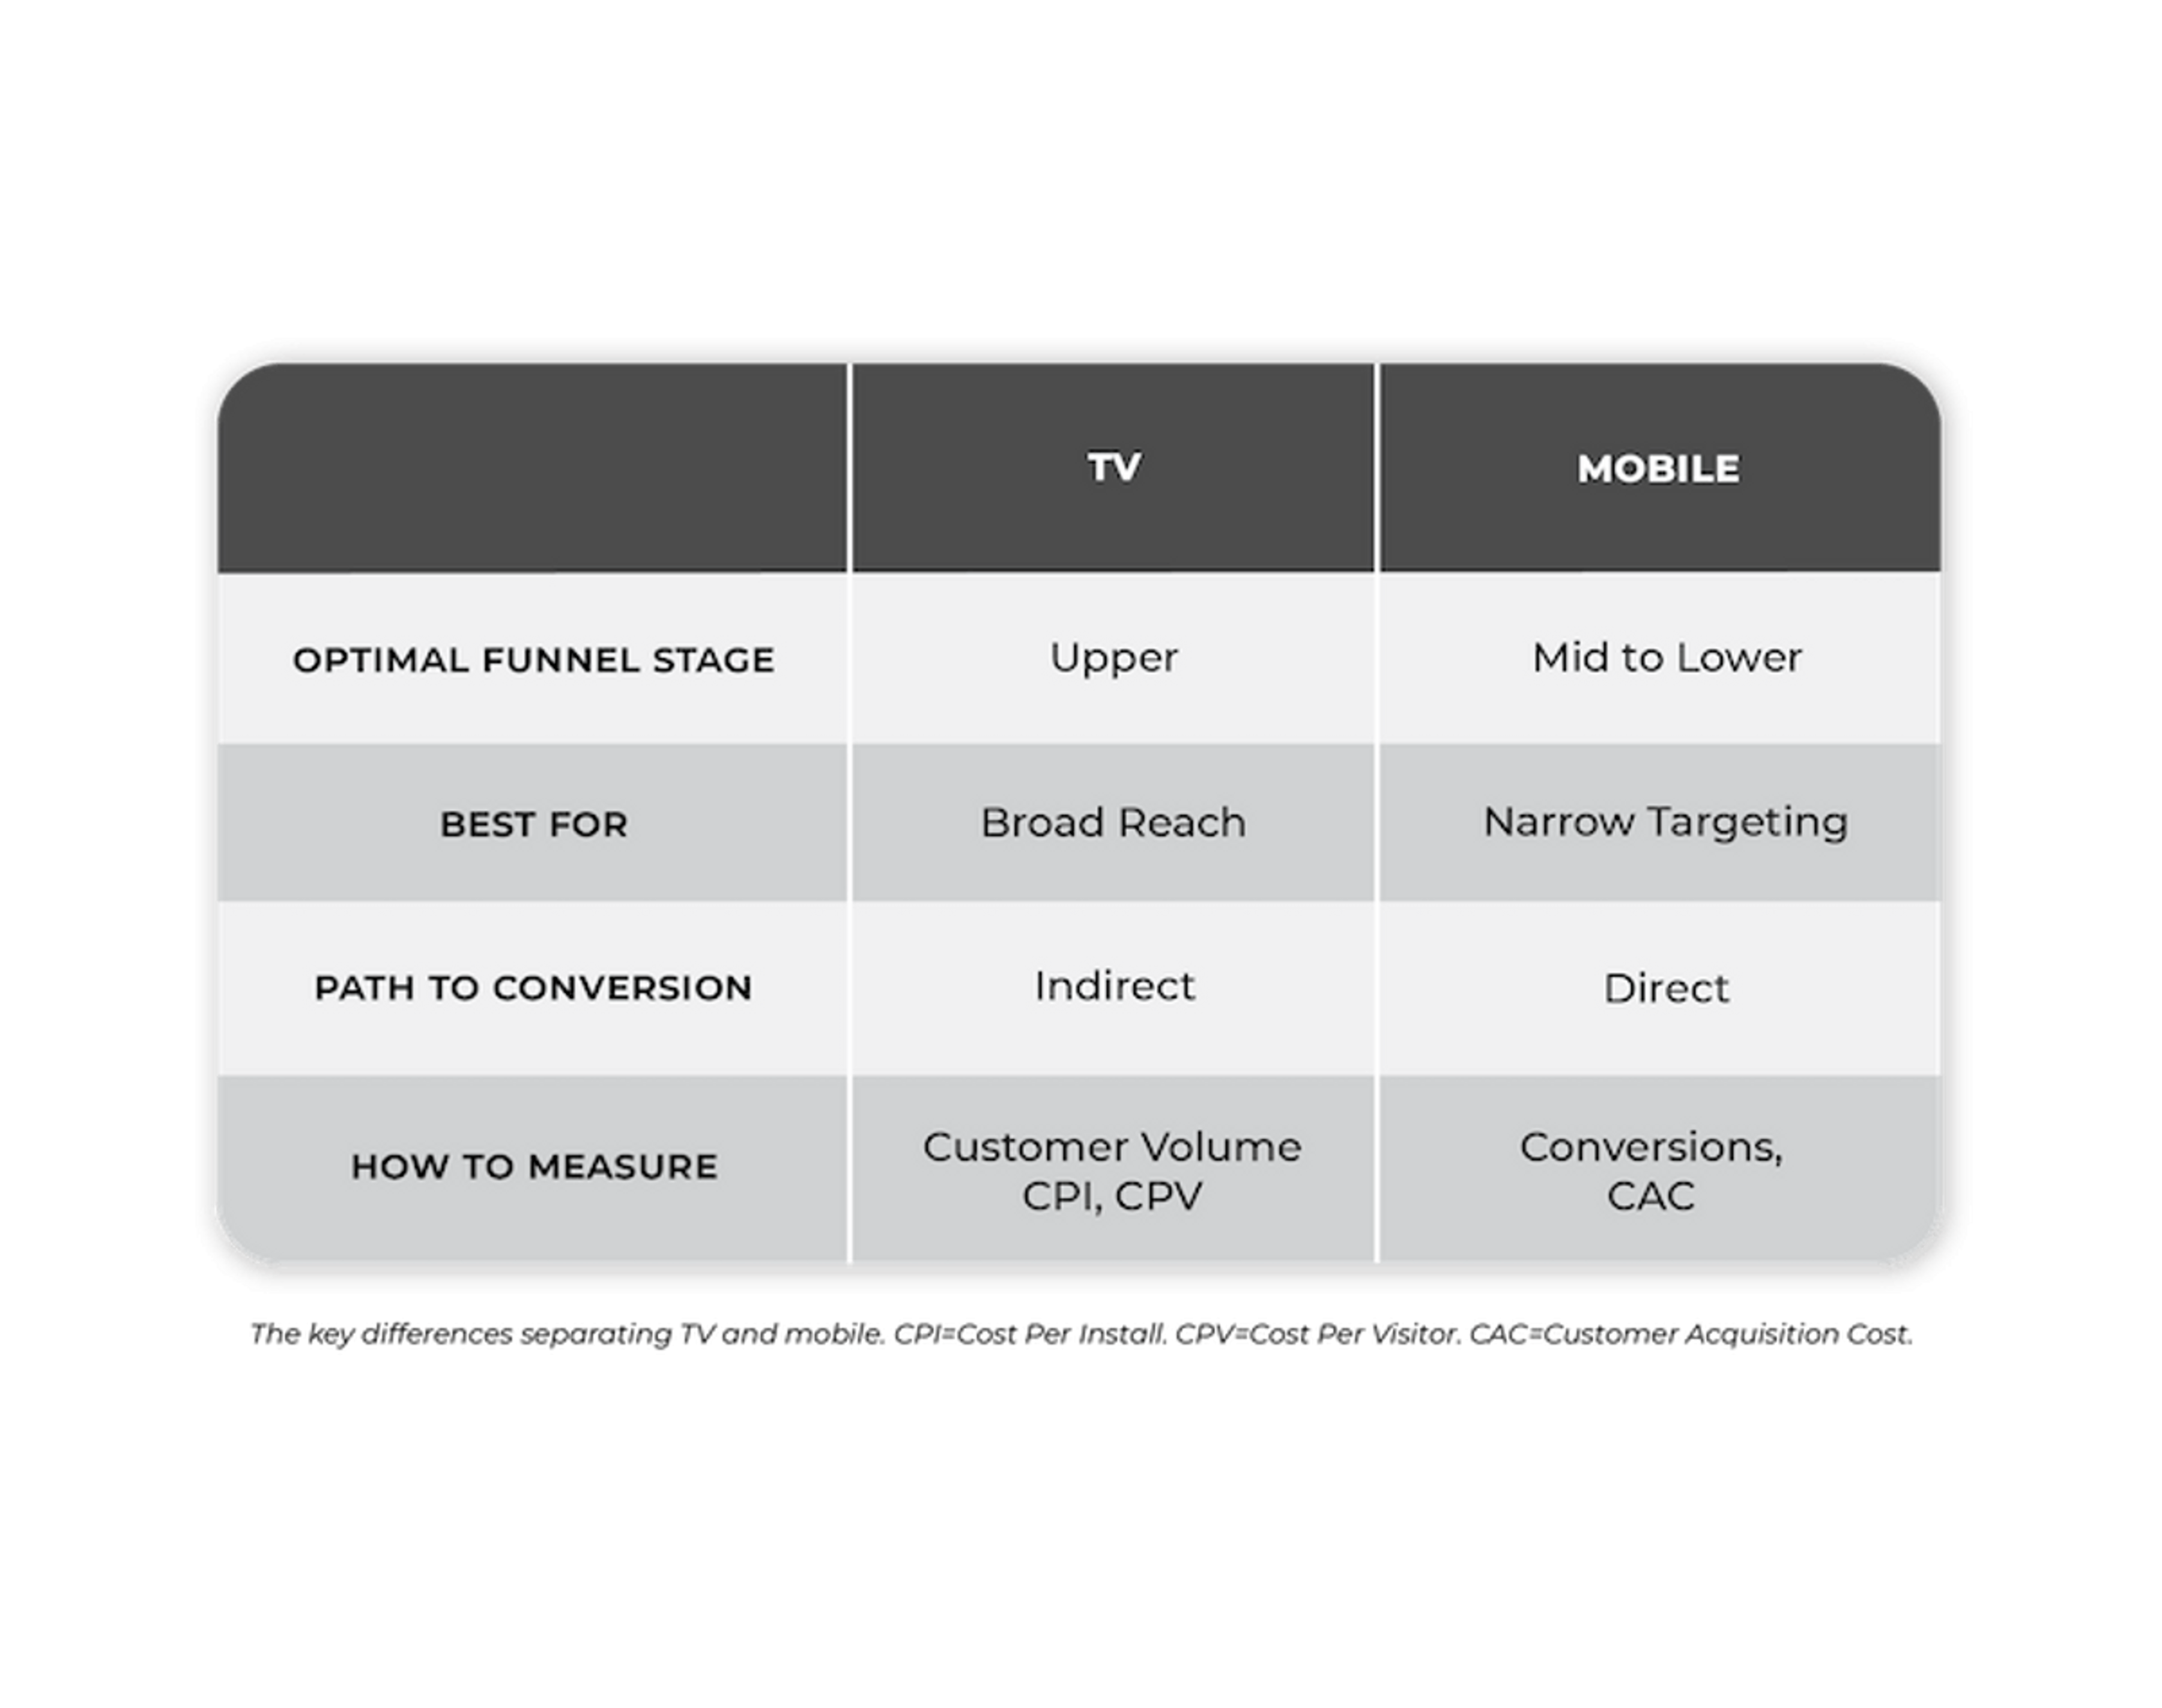 Table comparing TV and mobile in terms of optimal funnel stage, how to measure, path to conversion and more.